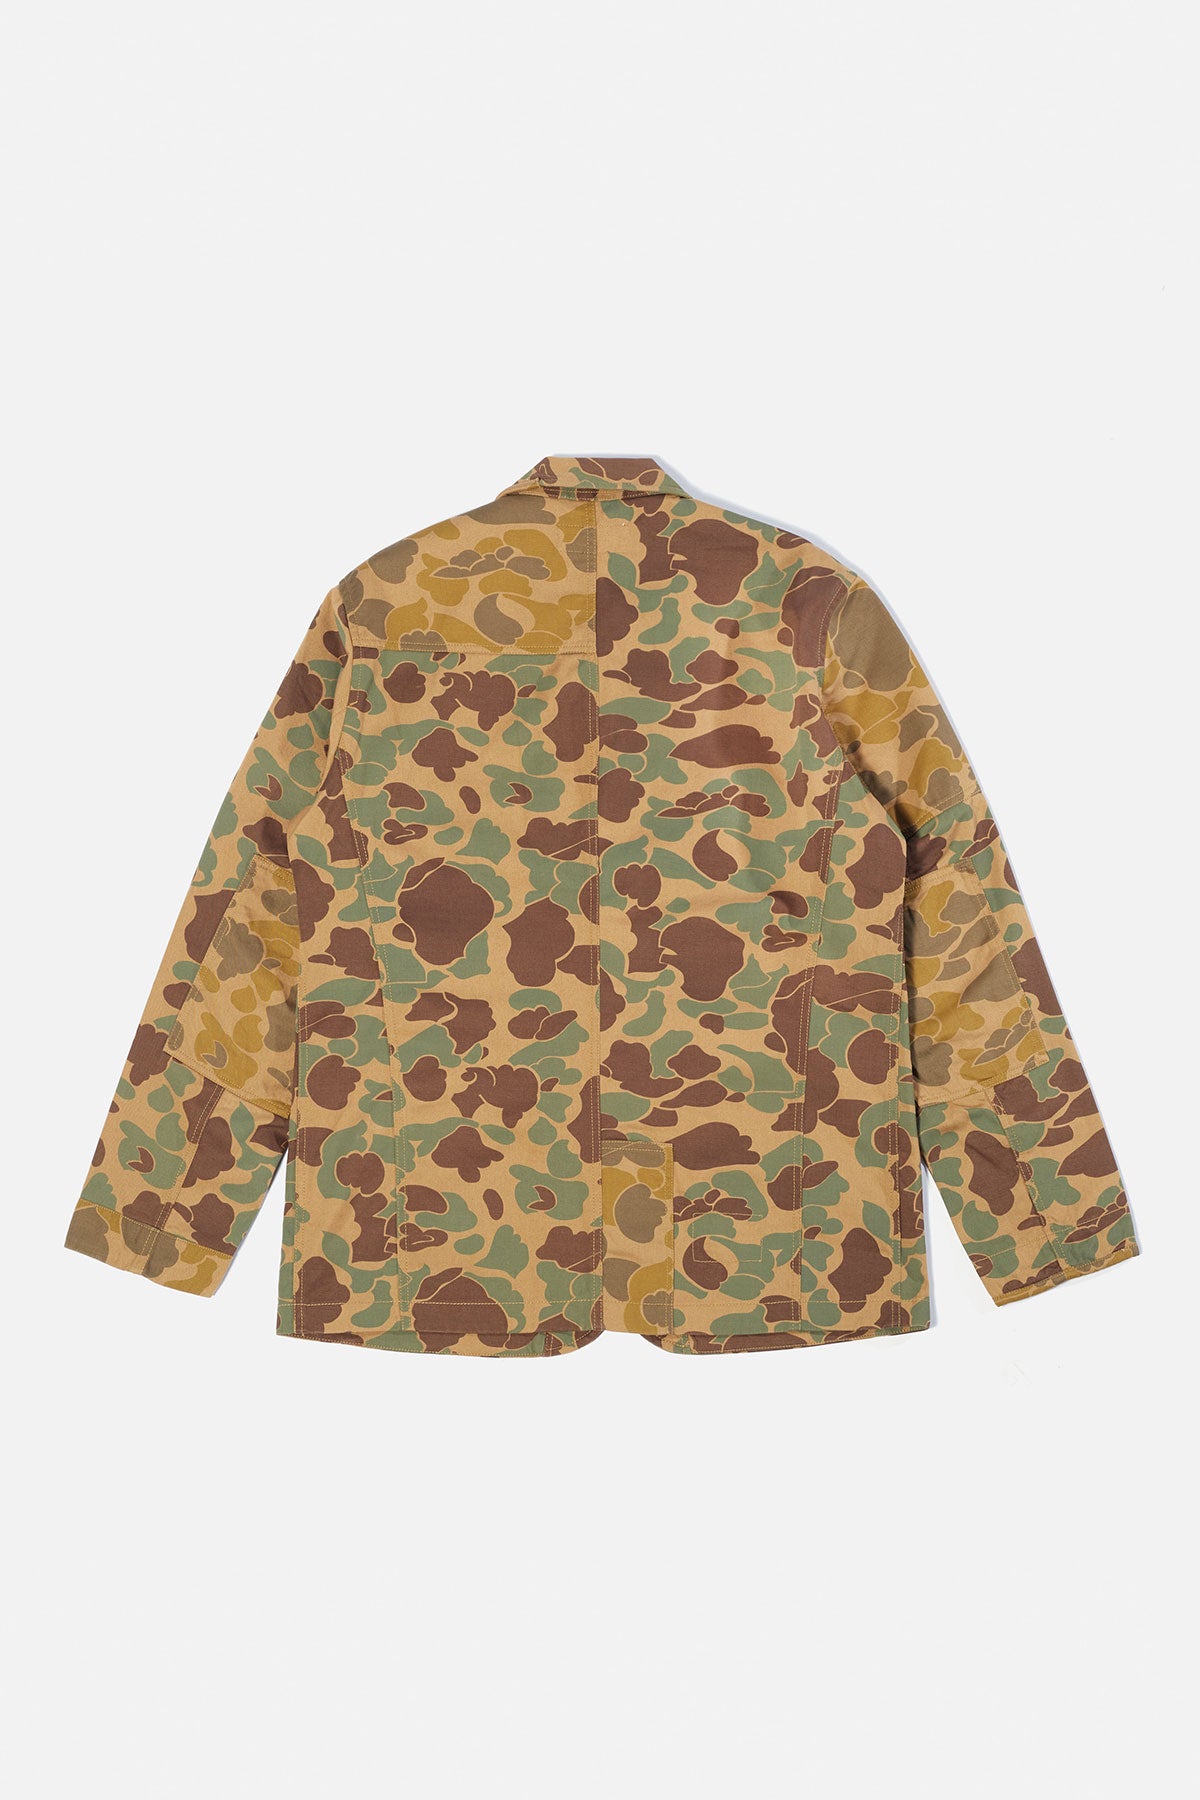 Universal Works Patched Mill Bakers Jacket In Sand/Khaki Cotton Camo